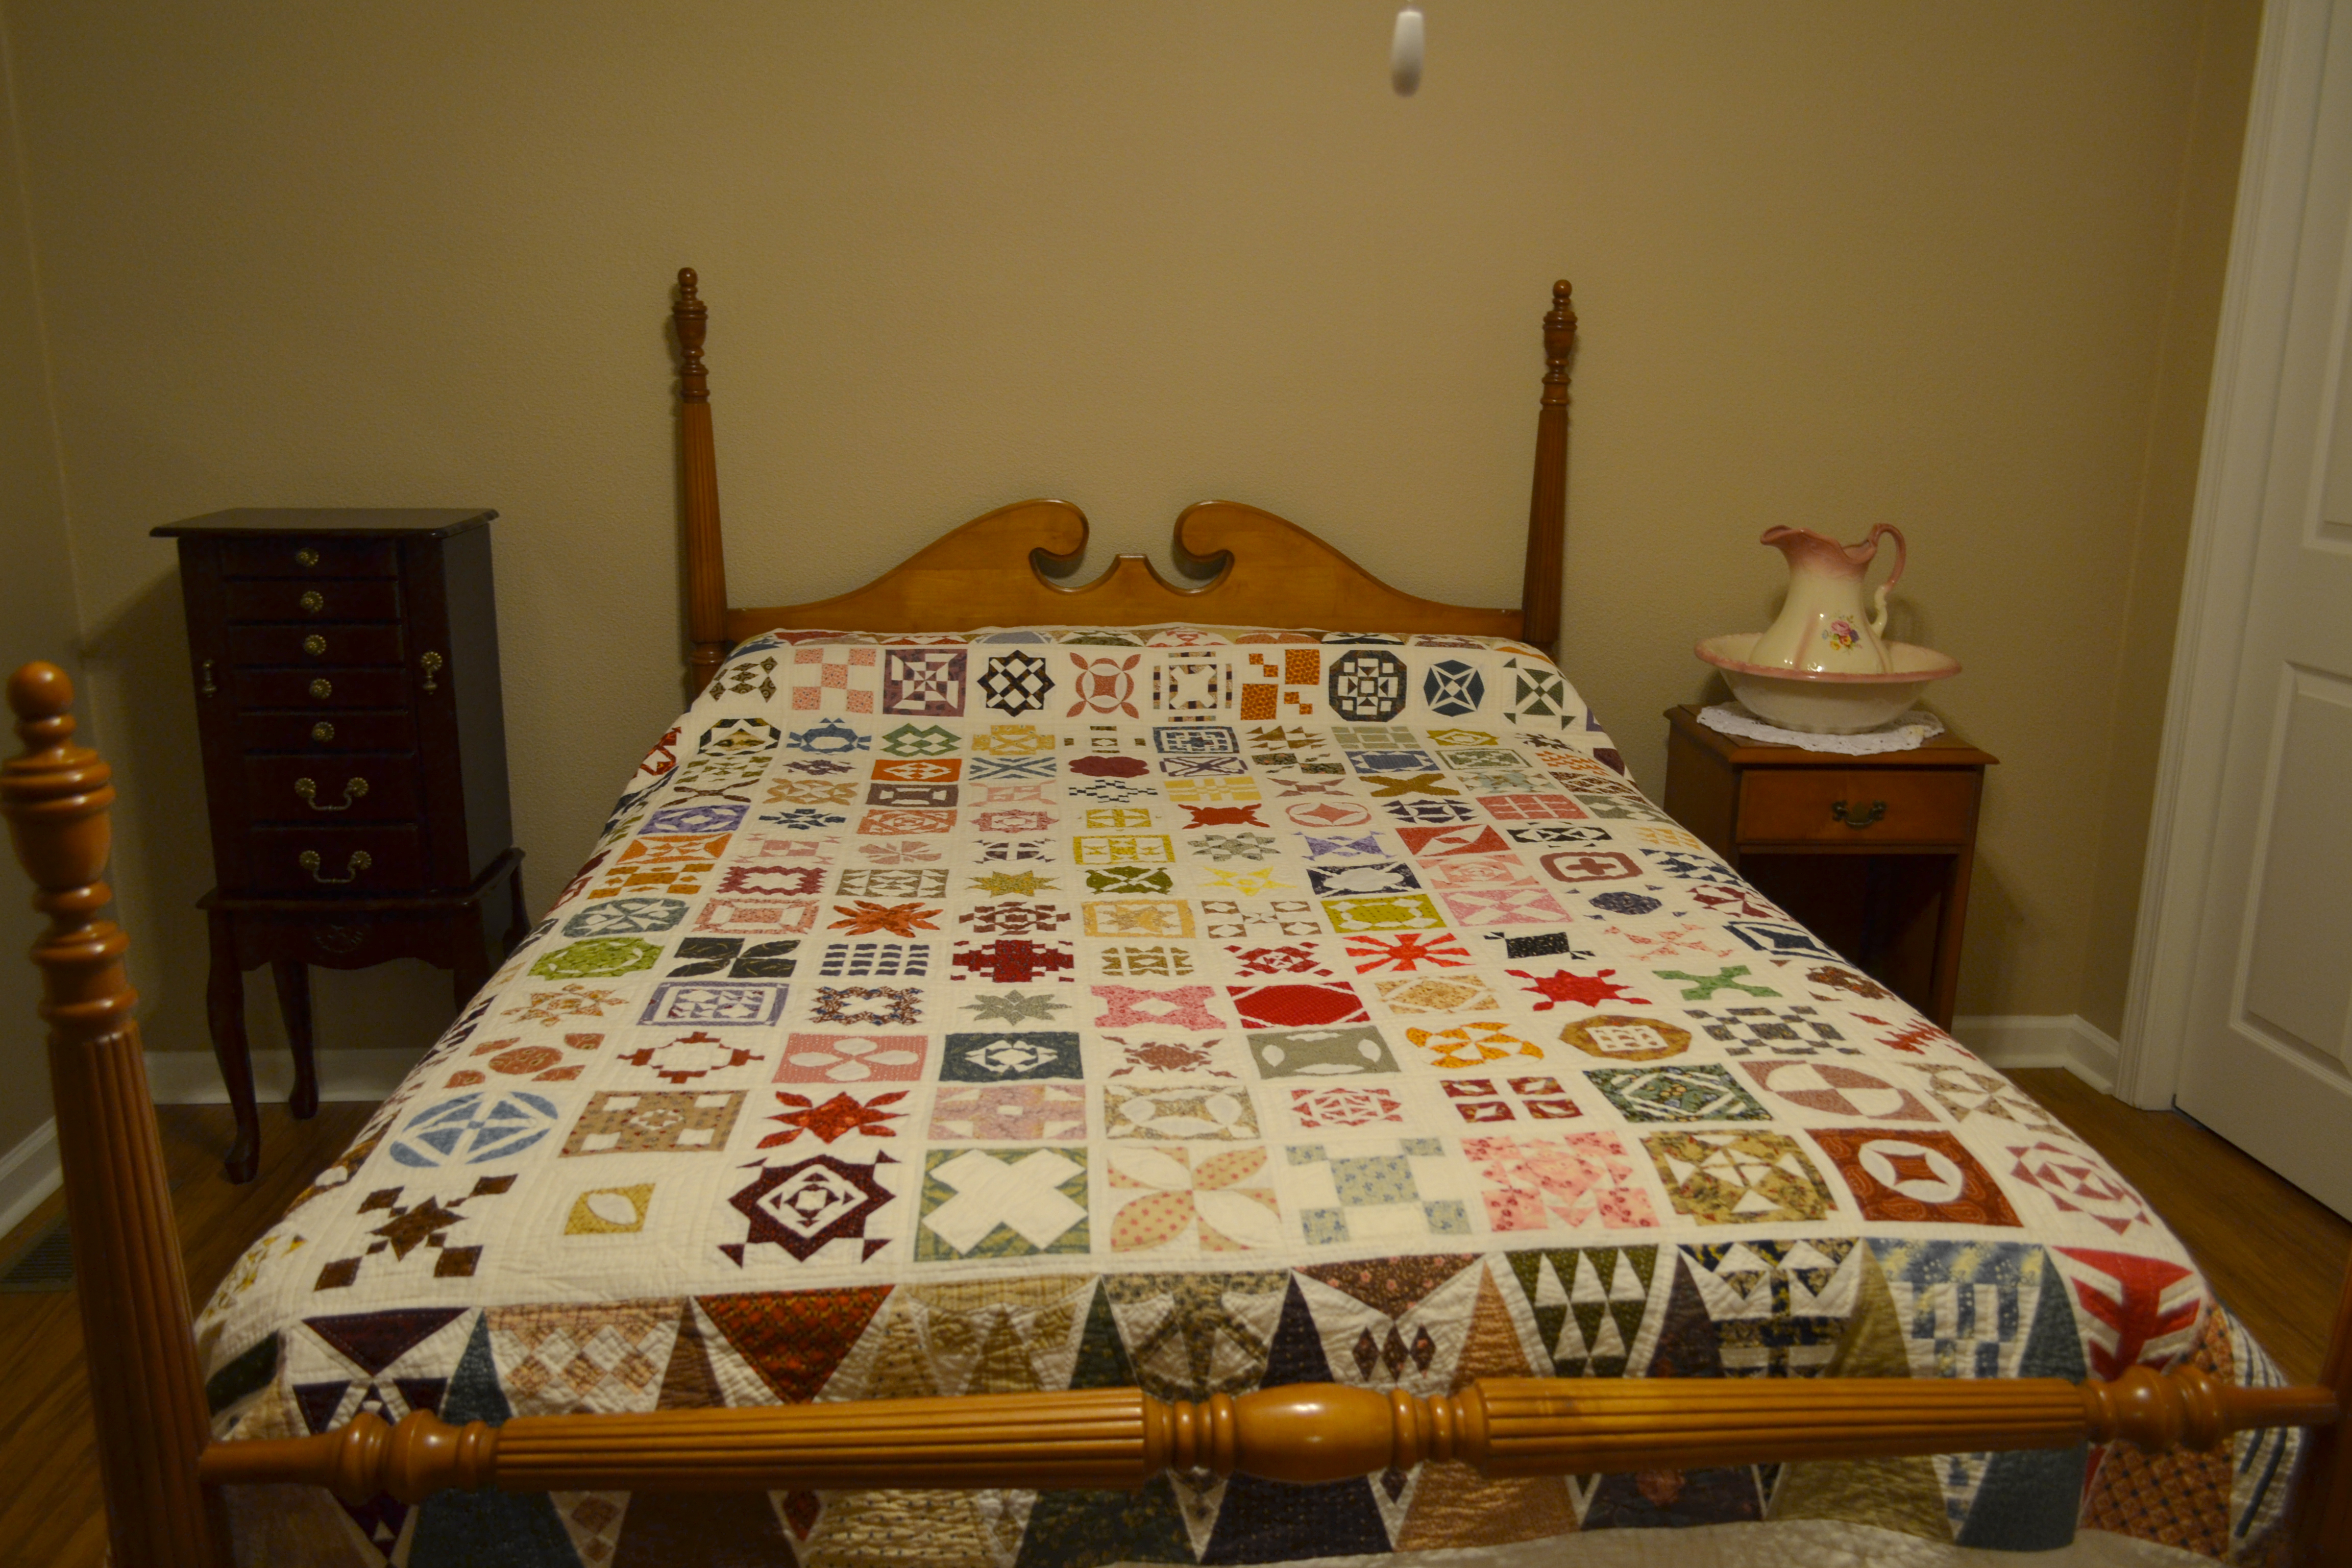 Donna Patterson's finished "My Dear Jane" quilt